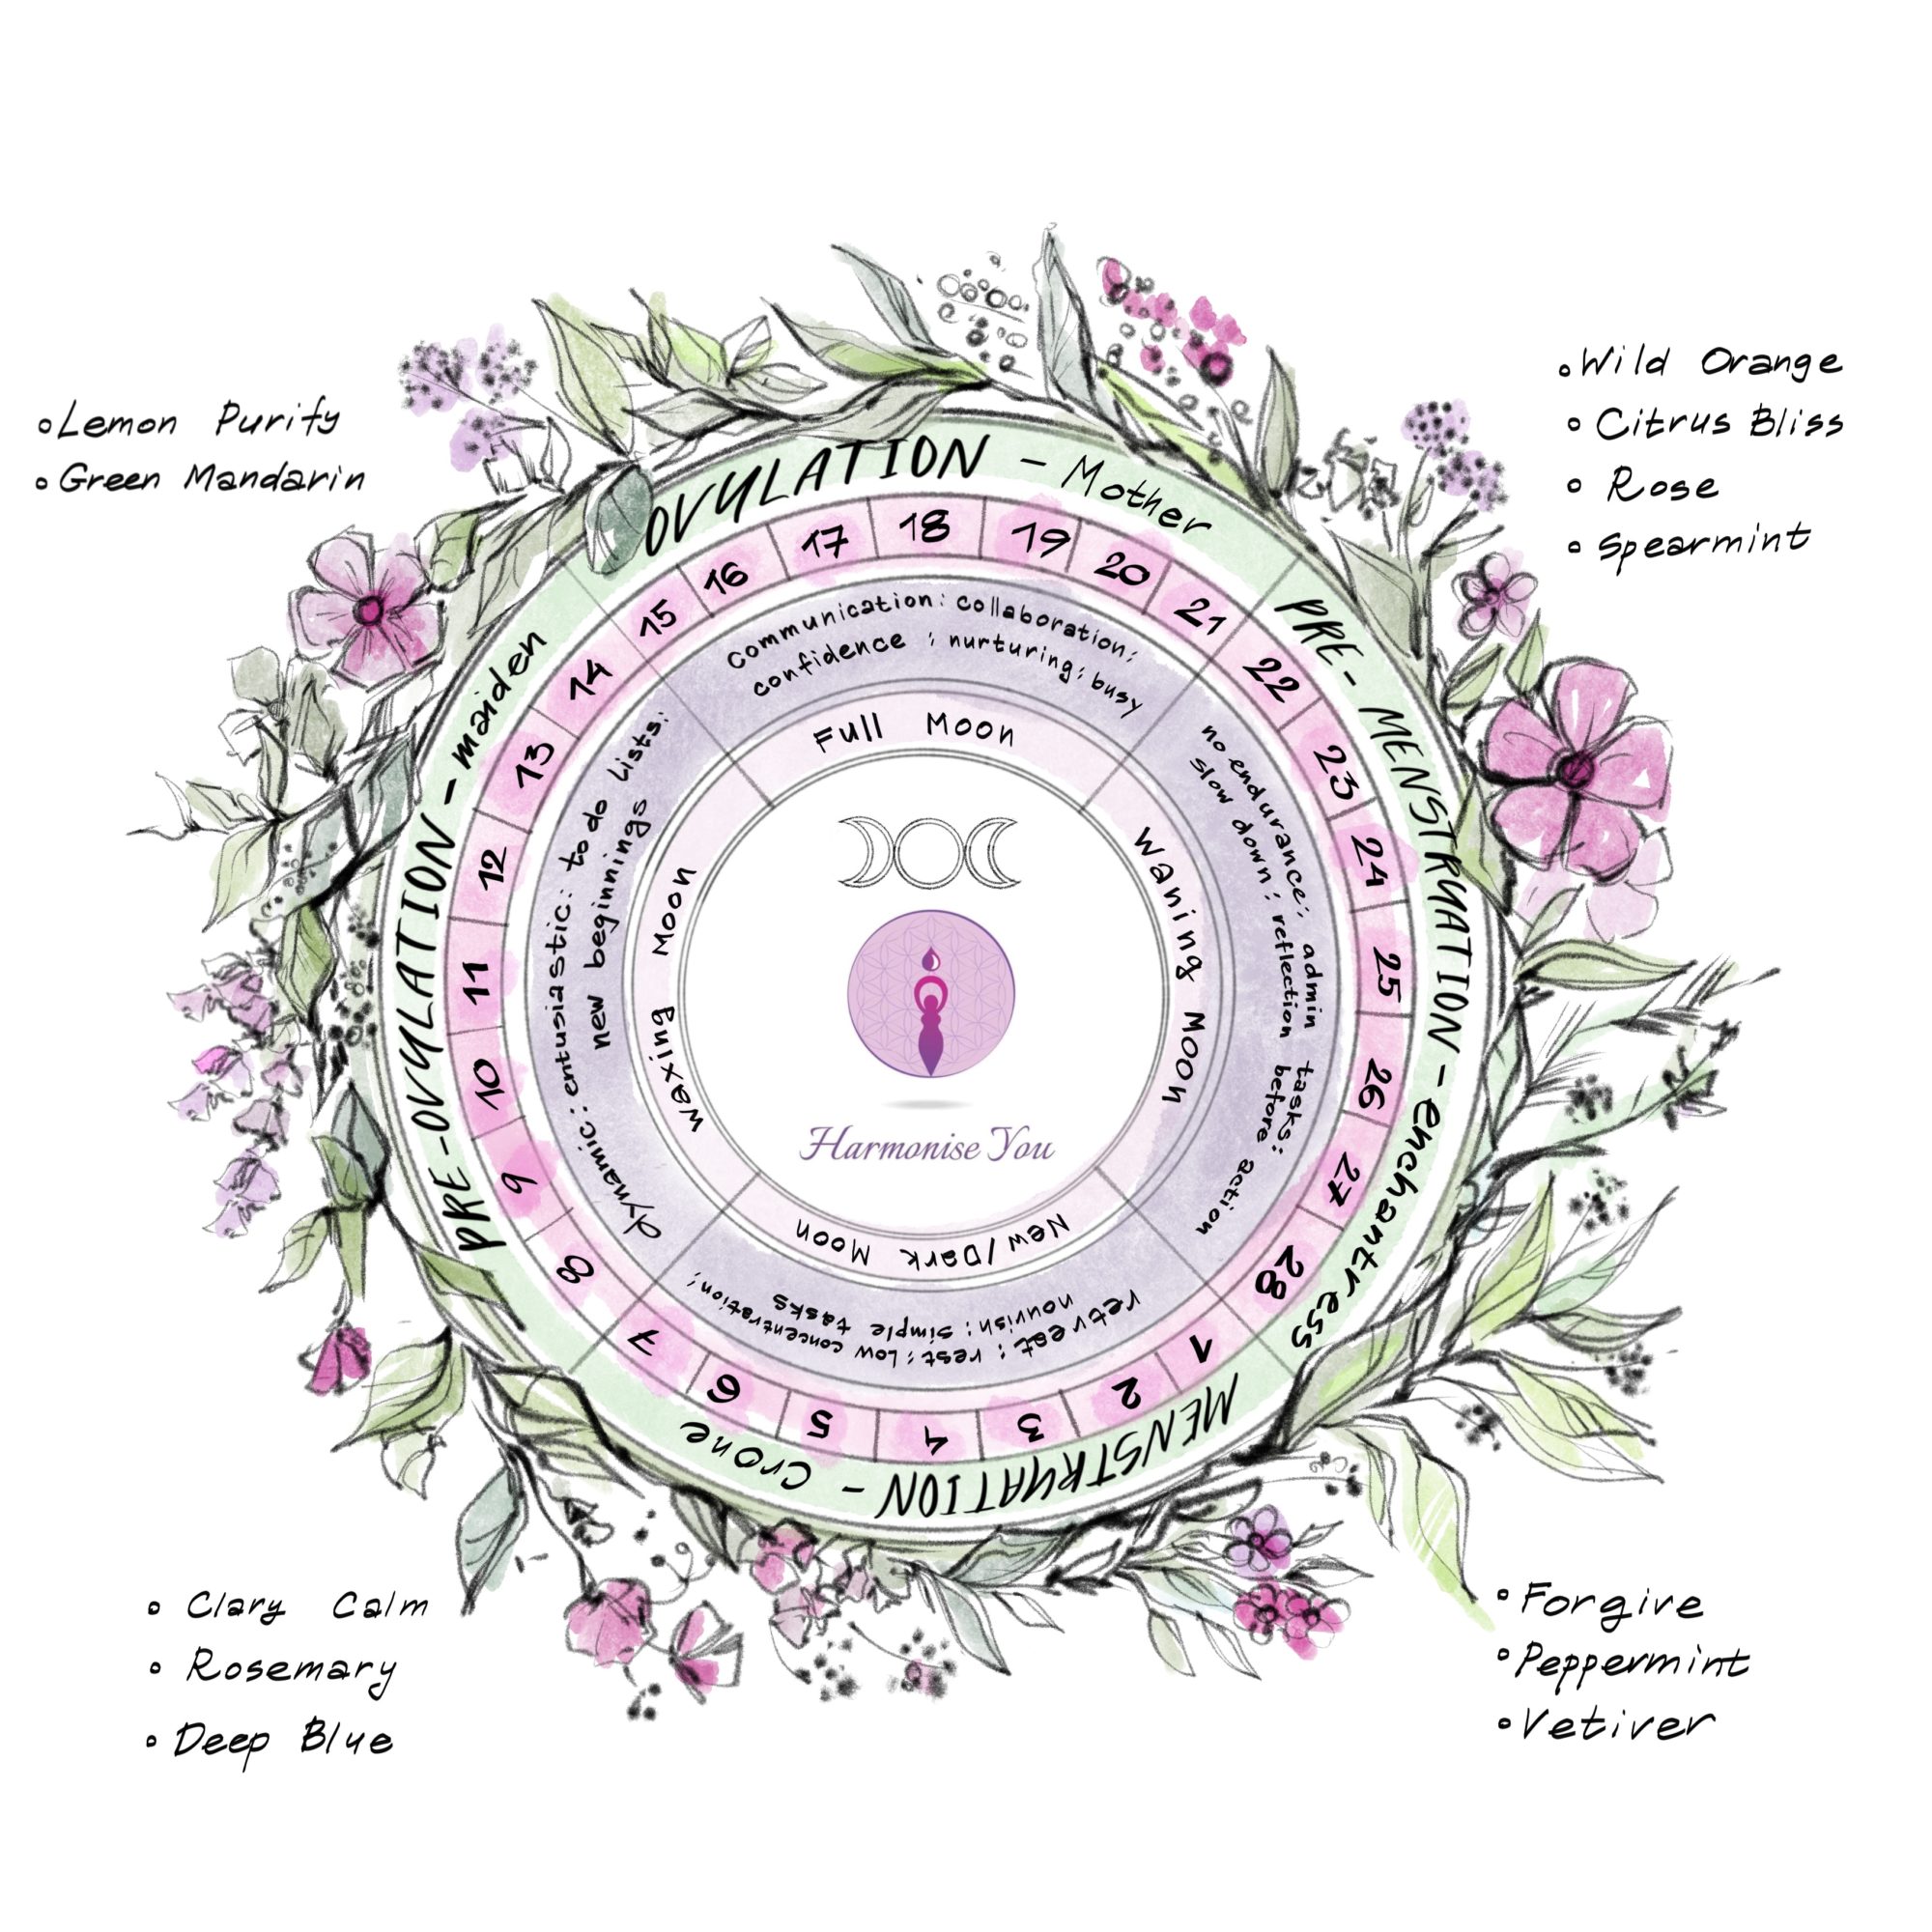 Kinfolk Apothecary - {moon cycle} As women we are cyclical. Just as the  seasons are cyclical, our menstrual cycle move through different phases  every month, including our cervical mucus. Our cycles start